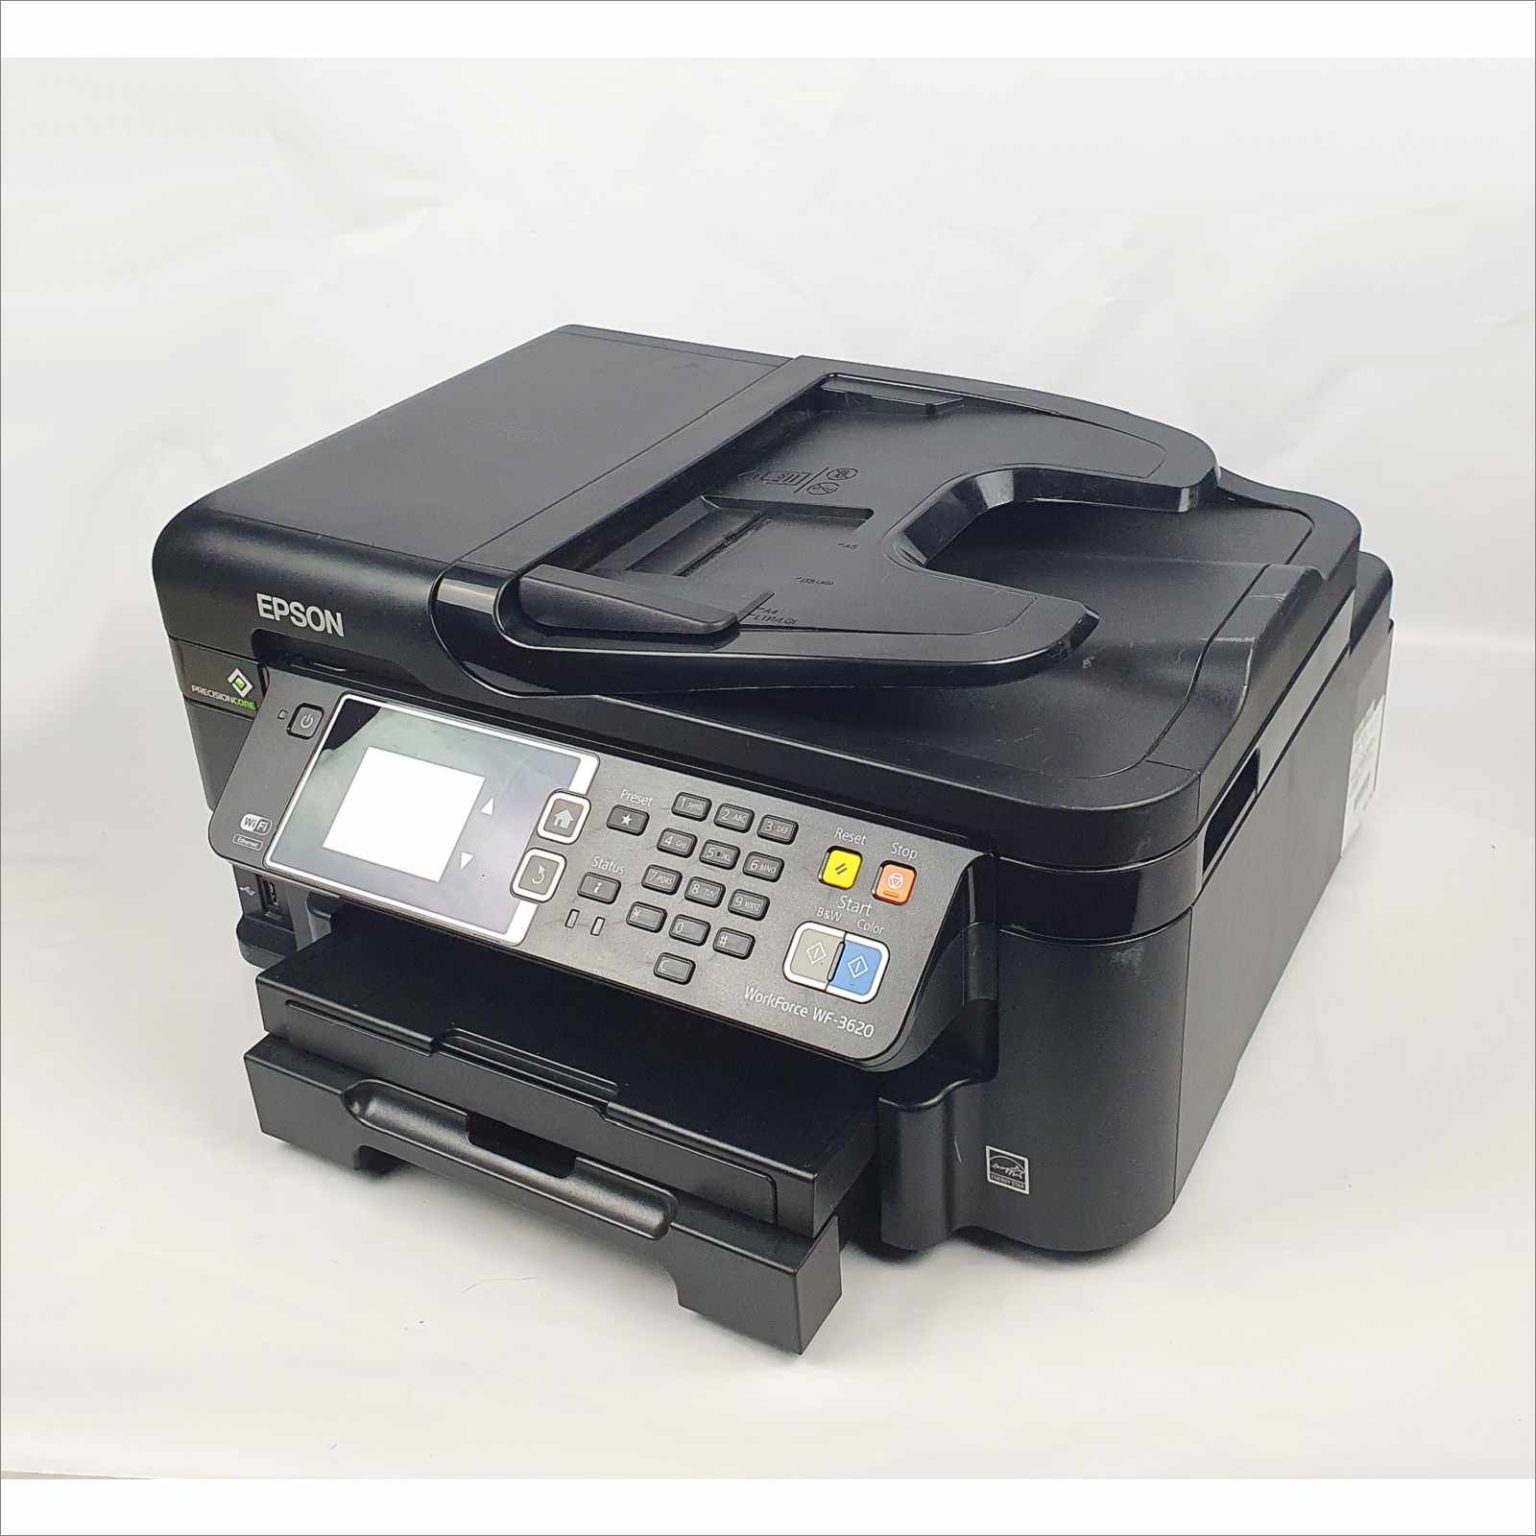 Epson Workforce Wf 3620 All In One Printer Fast Scanner C481d Computer Network Telecom 5750